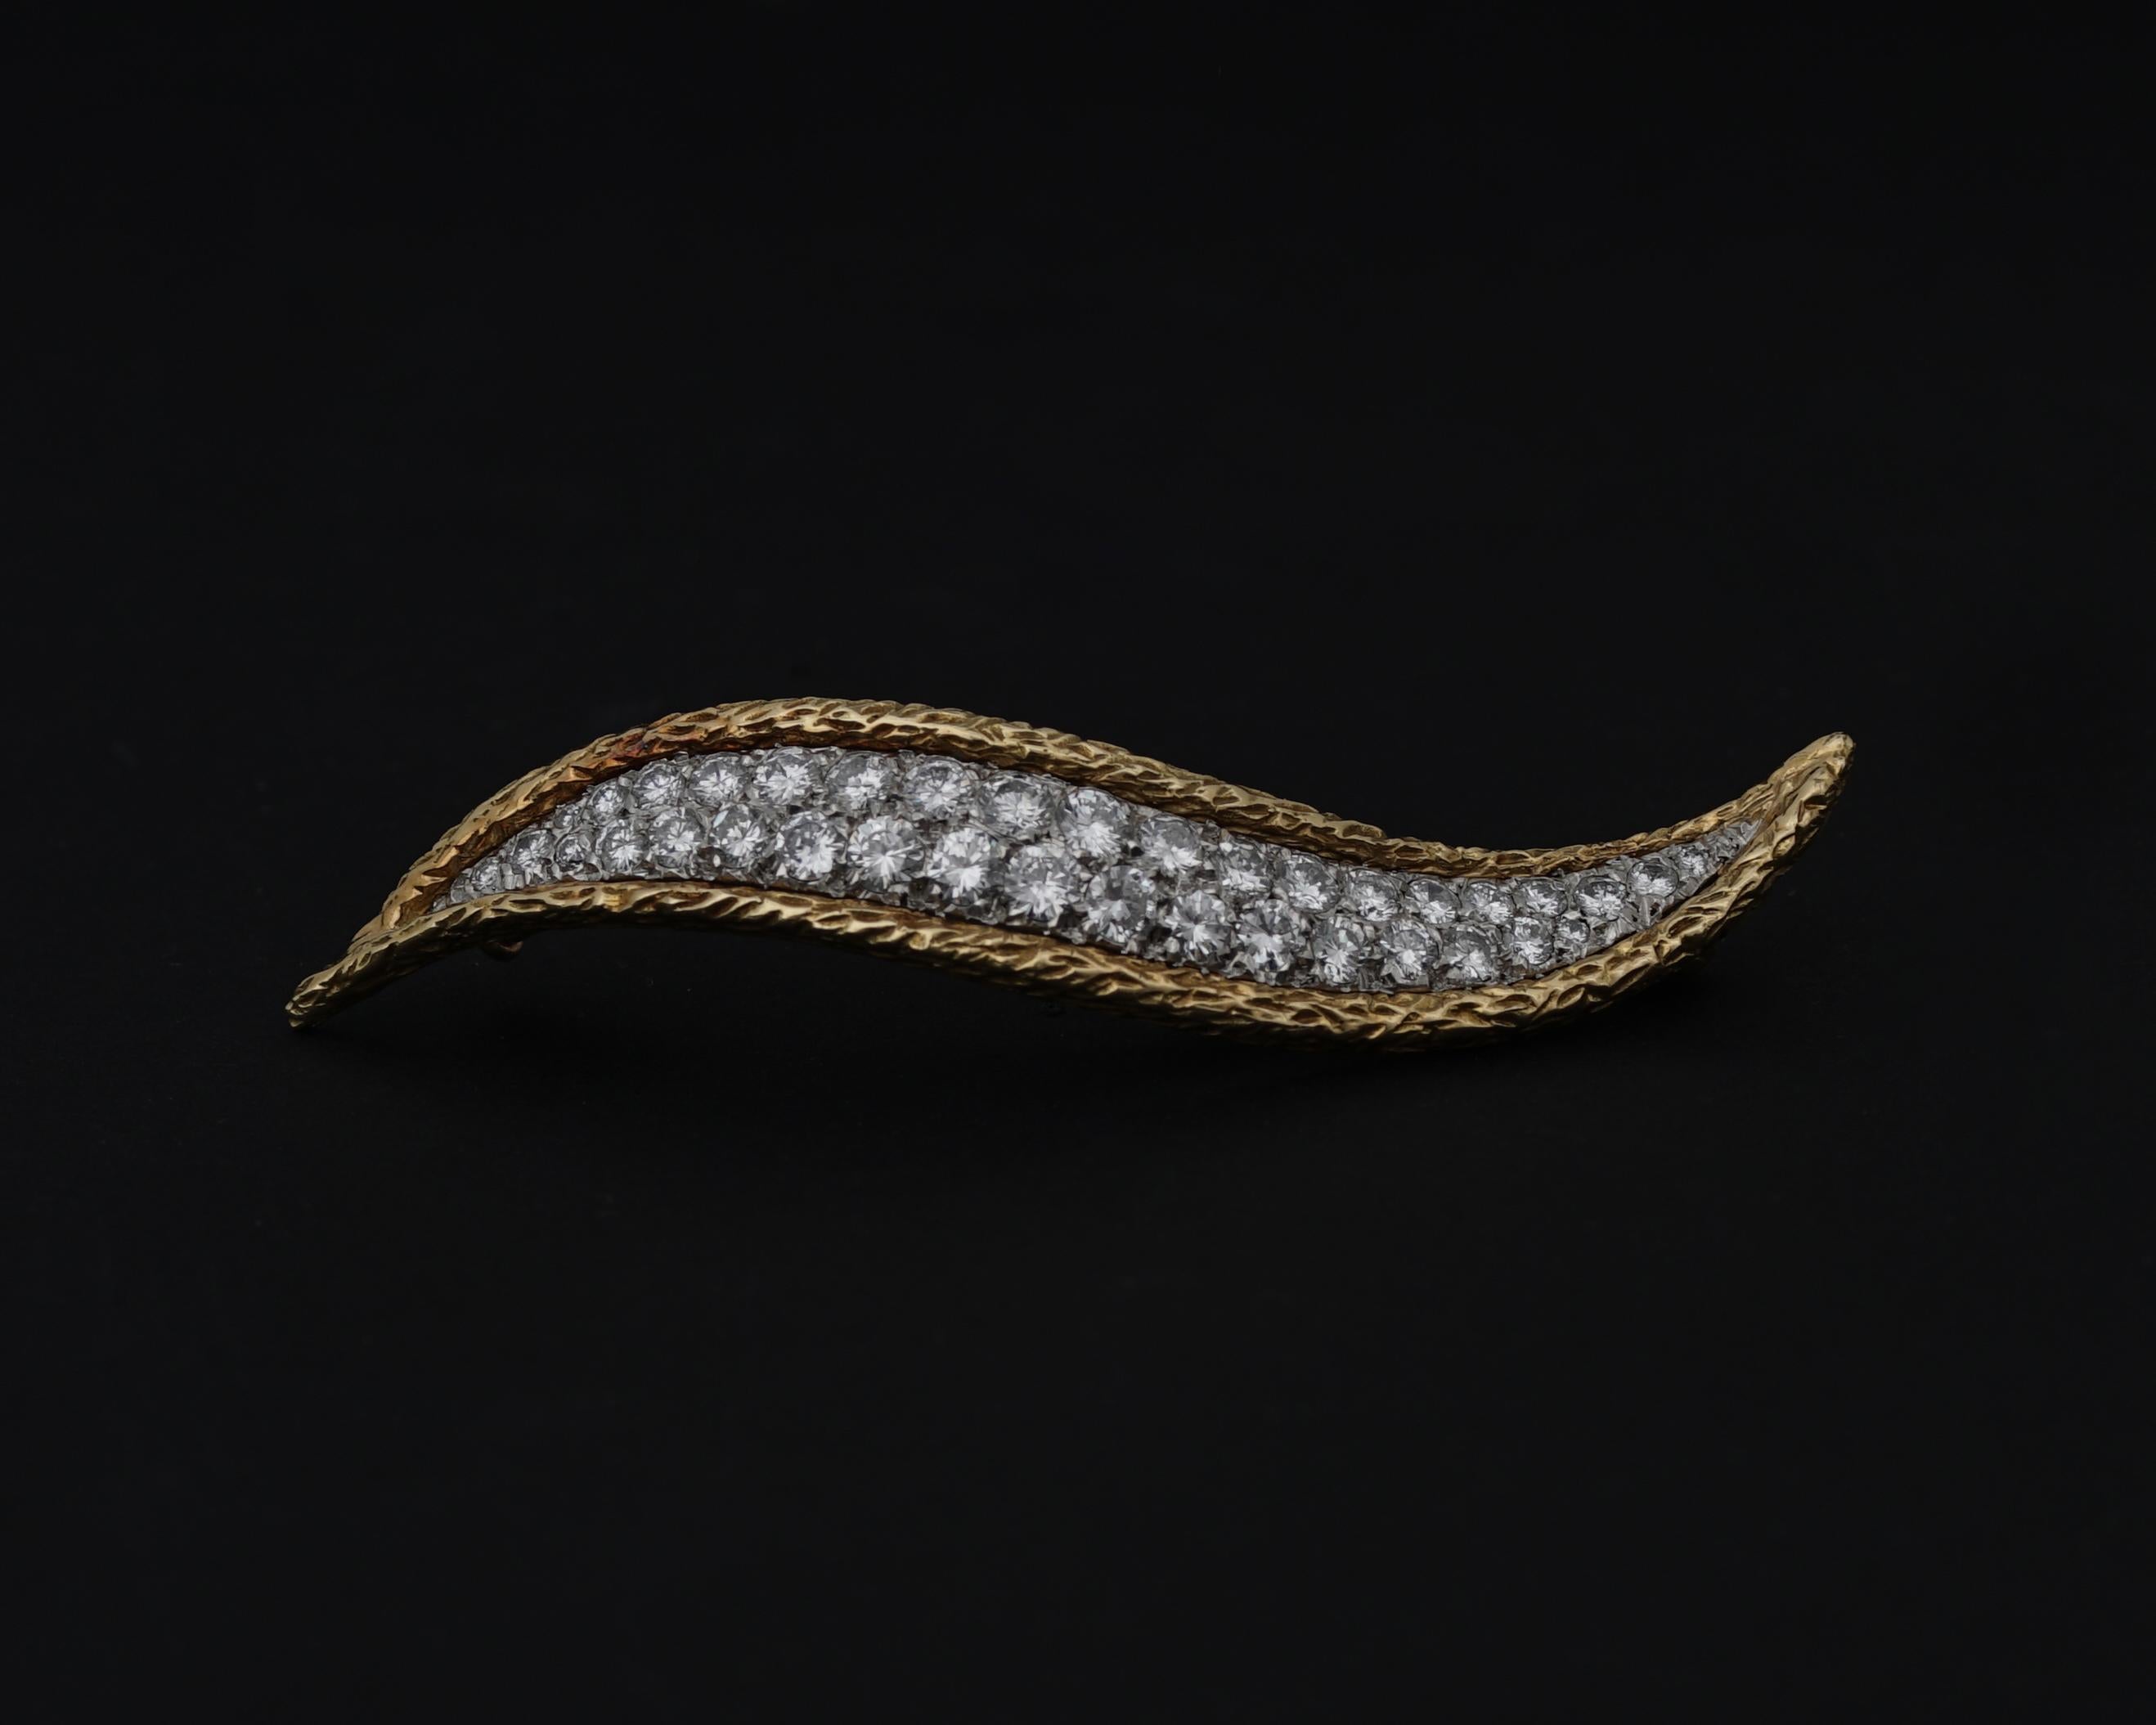 Important Van Cleef & Arpels, 18k Gold and Diamonds Flame Brooch, 1967
Of stylized flame design, set with 37 round brilliant-cut diamond for a total of 1,90 cts.
Signed and Numbered

Brooch Dimension
5.8cm L x 1.7cm W.

The Flame design was